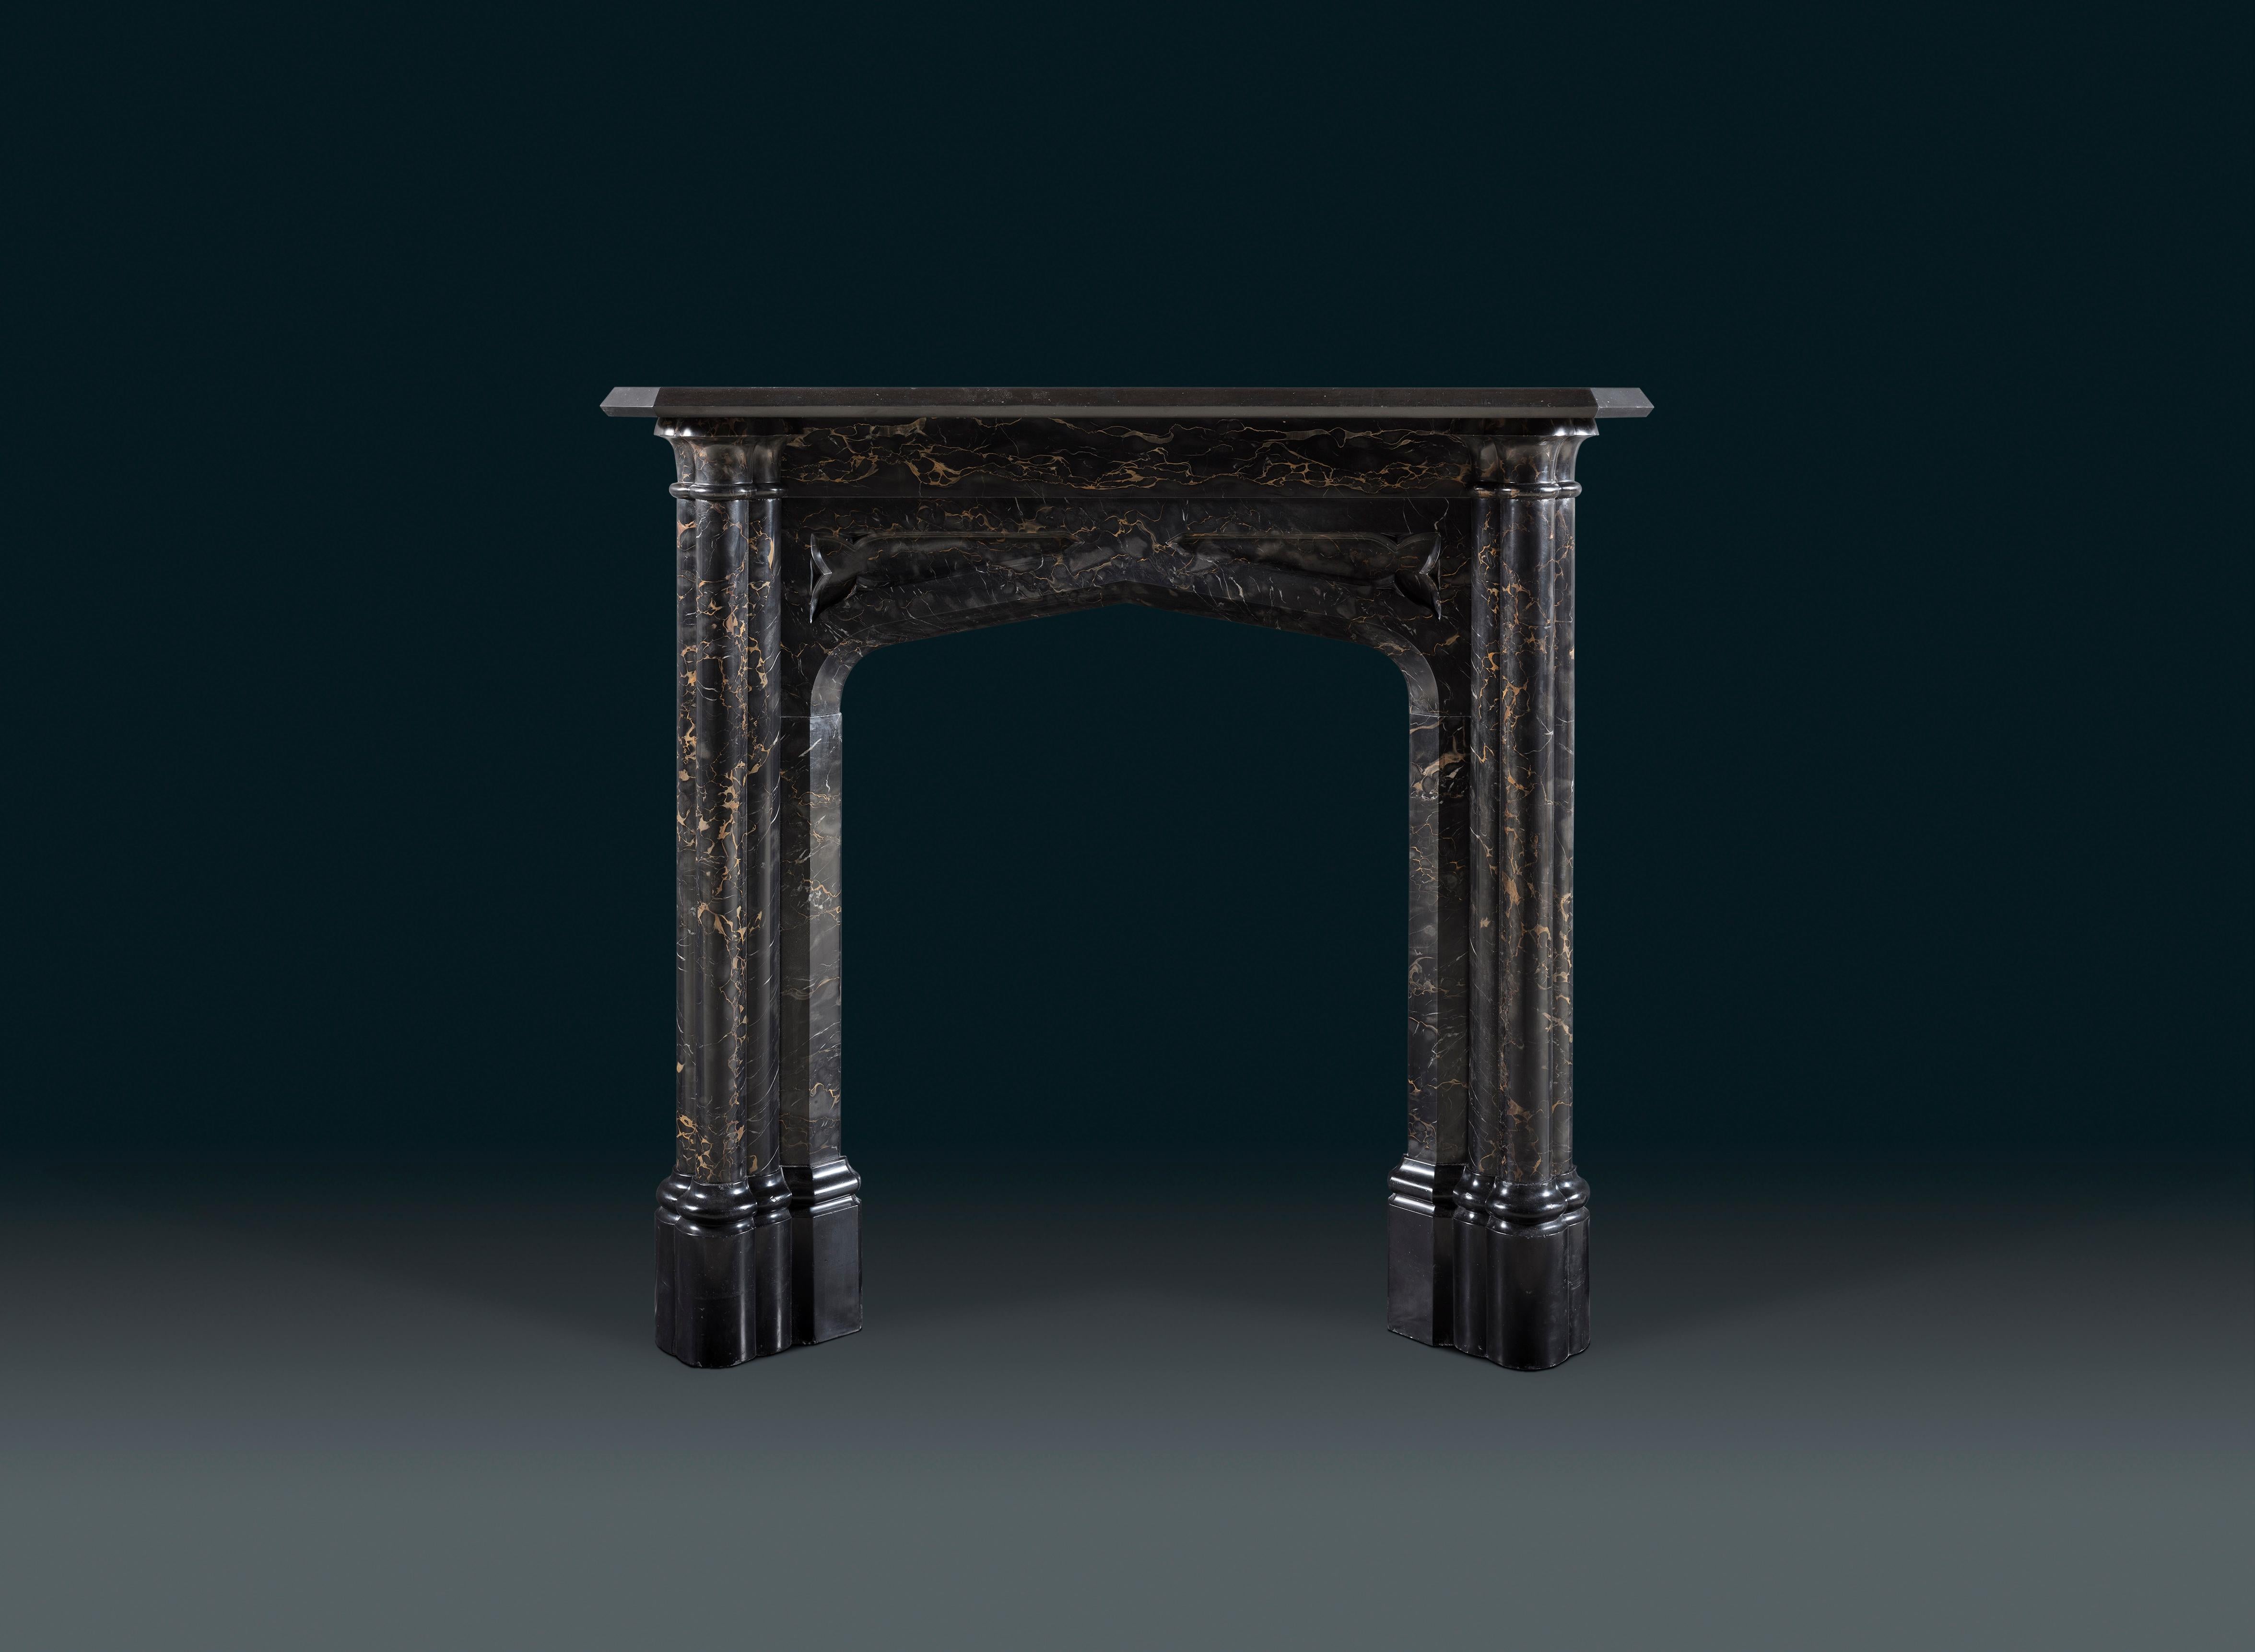 A rare early 19th Century Gothic Revival chimneypiece in Portoro and Belgium Black marbles. The quatrefoil column jambs flank a sloped Gothic arch opening, on tall moulded footblocks.